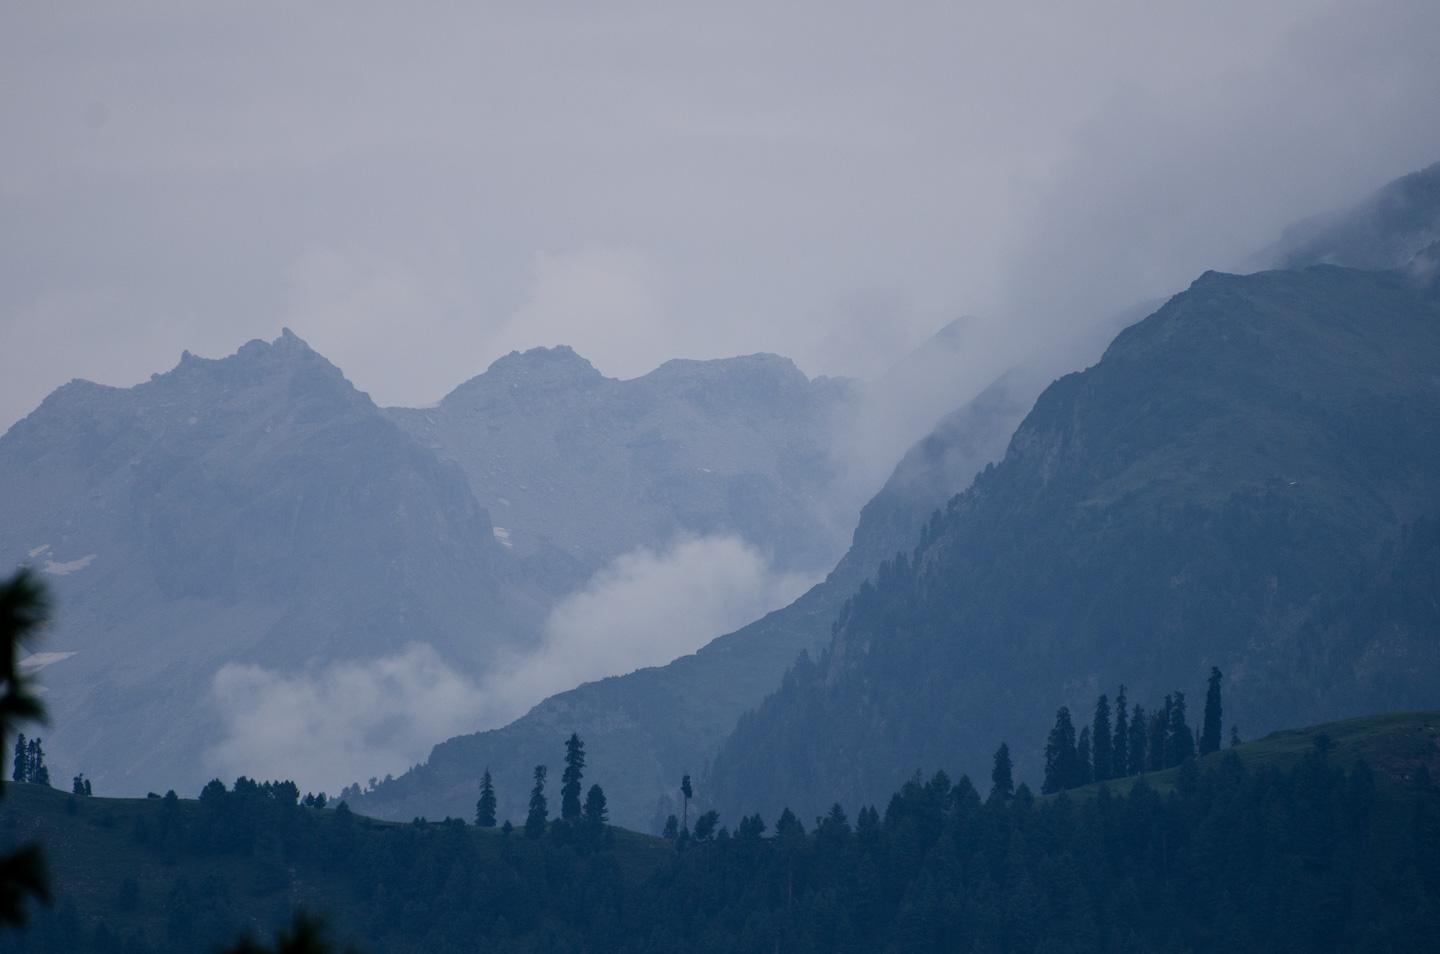 A cold cloudy day featuring summer in Shogran